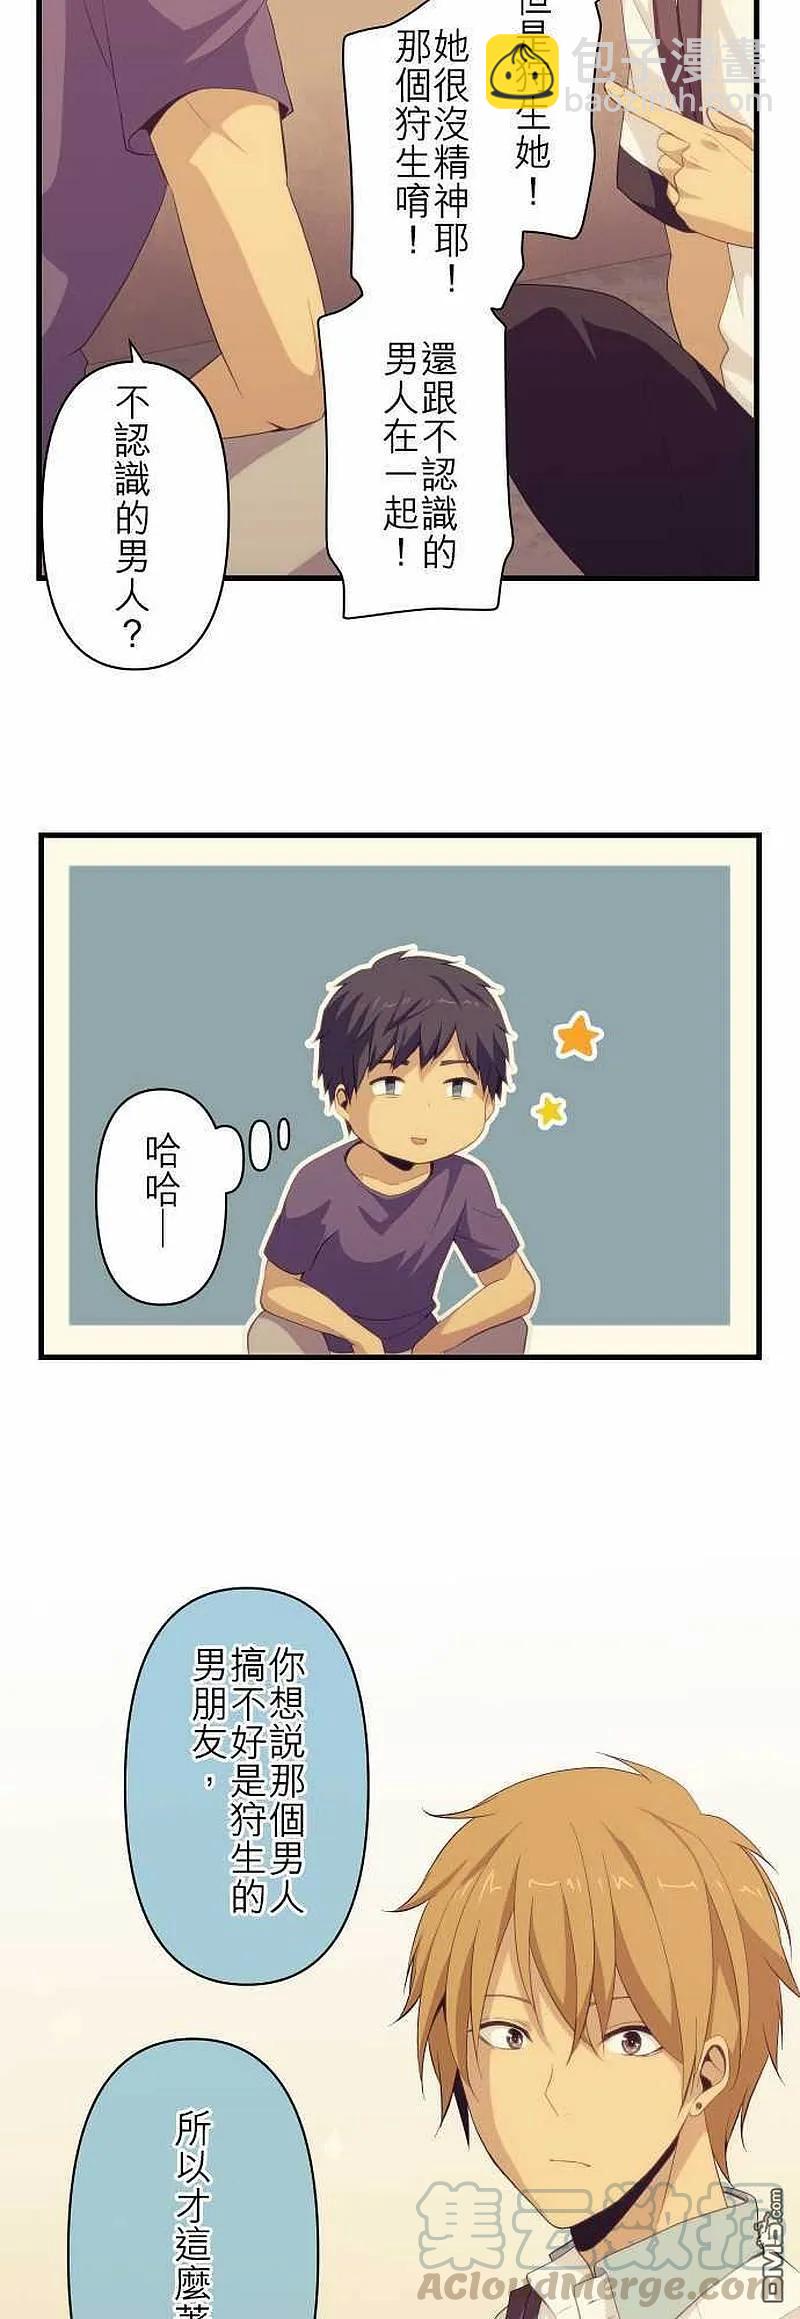 ReLIFE 重返17歲 - 第97話 雙重恐慌 - 3